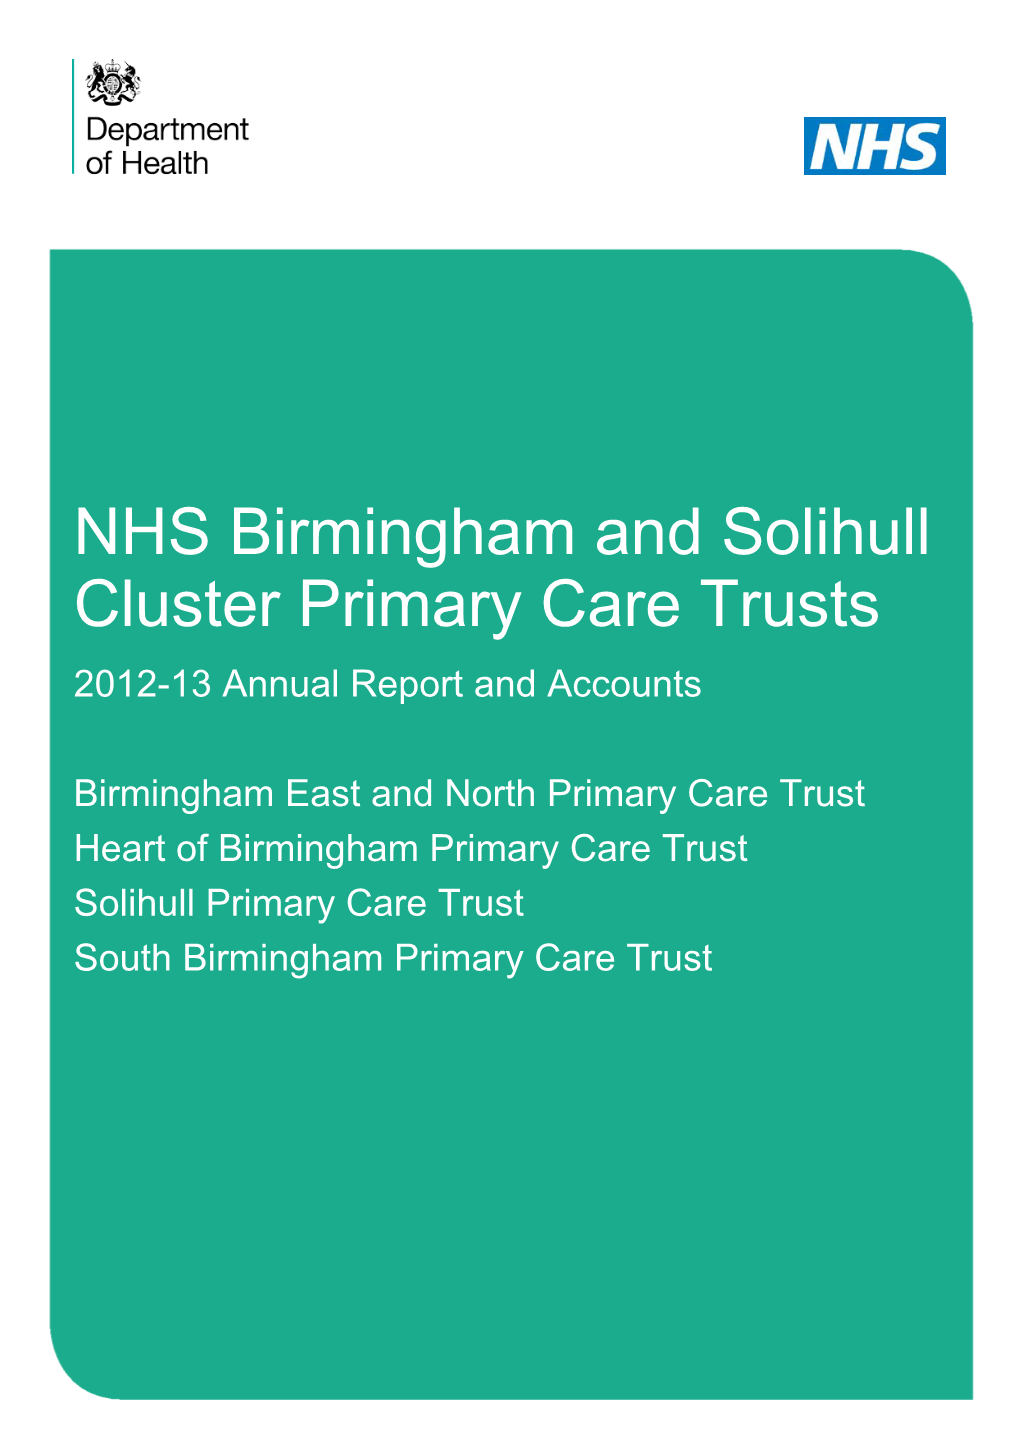 NHS Birmingham and Solihull Cluster Primary Care Trusts 2012-13 Annual Report and Accounts